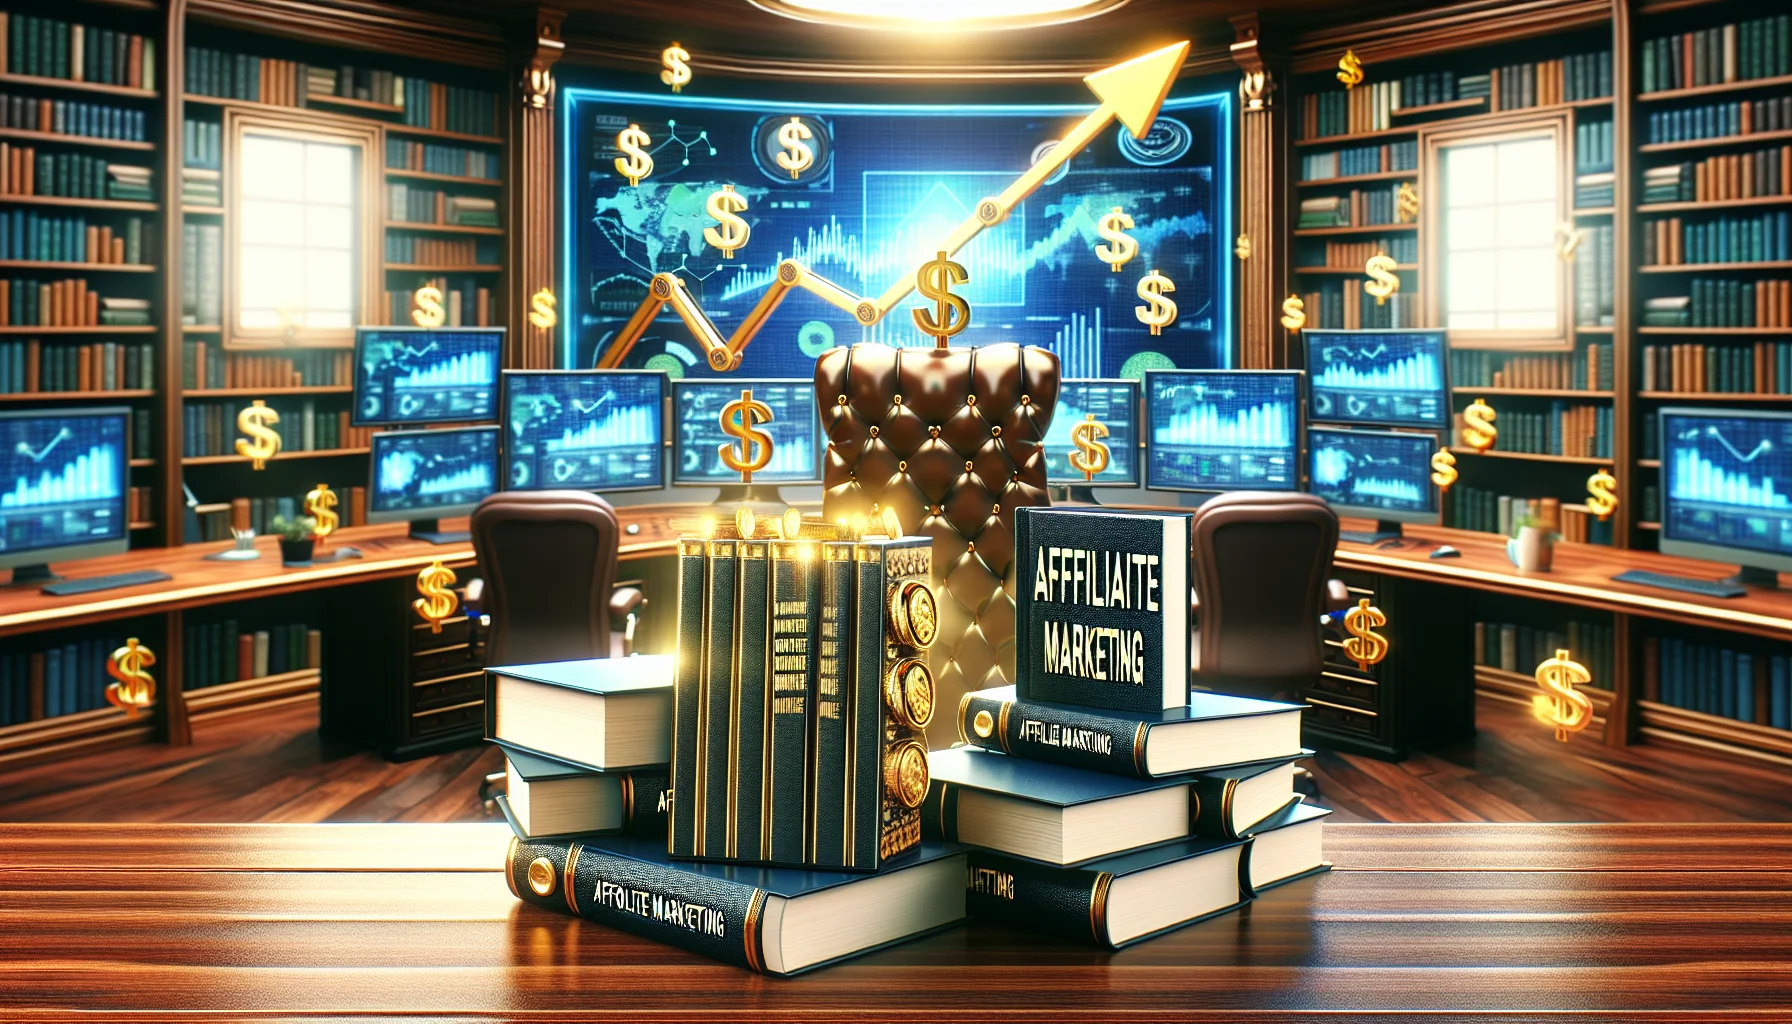 Create a humorous and realistic depiction of books about affiliate marketing. The books are prominently displayed in a setting related to making money online. The view brings us to an ornately designed virtual office space filled with high-tech computer setups and screen displays showing ascending graphs. The books are conspicuously arranged on a shining mahogany desk, enticing any viewer with their potential for wealth. Cheery, golden dollar signs are floating amusingly around the room, signifying the potential monetary rewards promised by these books.